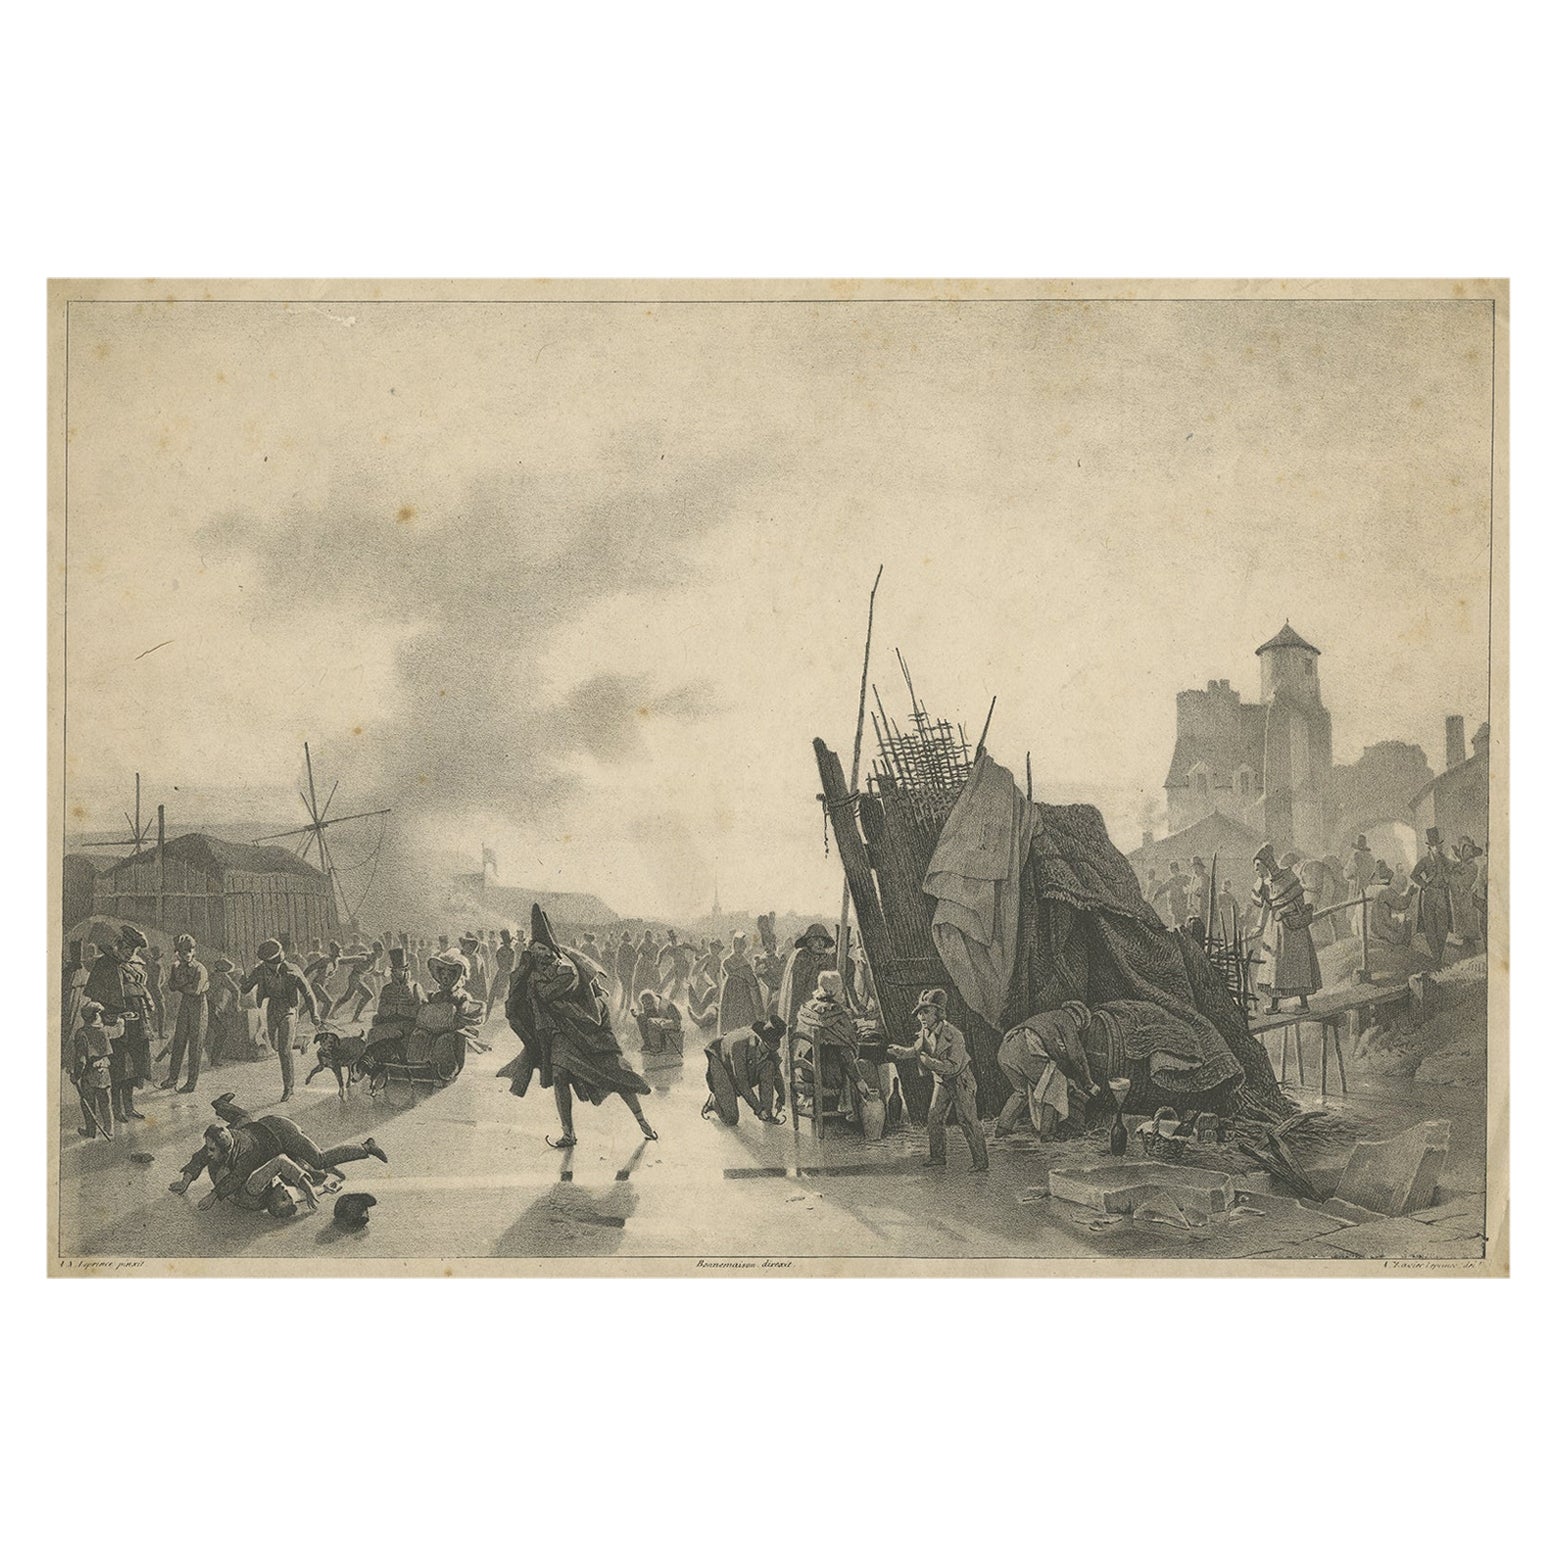 Old Lithograph of an Ice Skating Scene after a Painting by Xavier Leprince, 1823